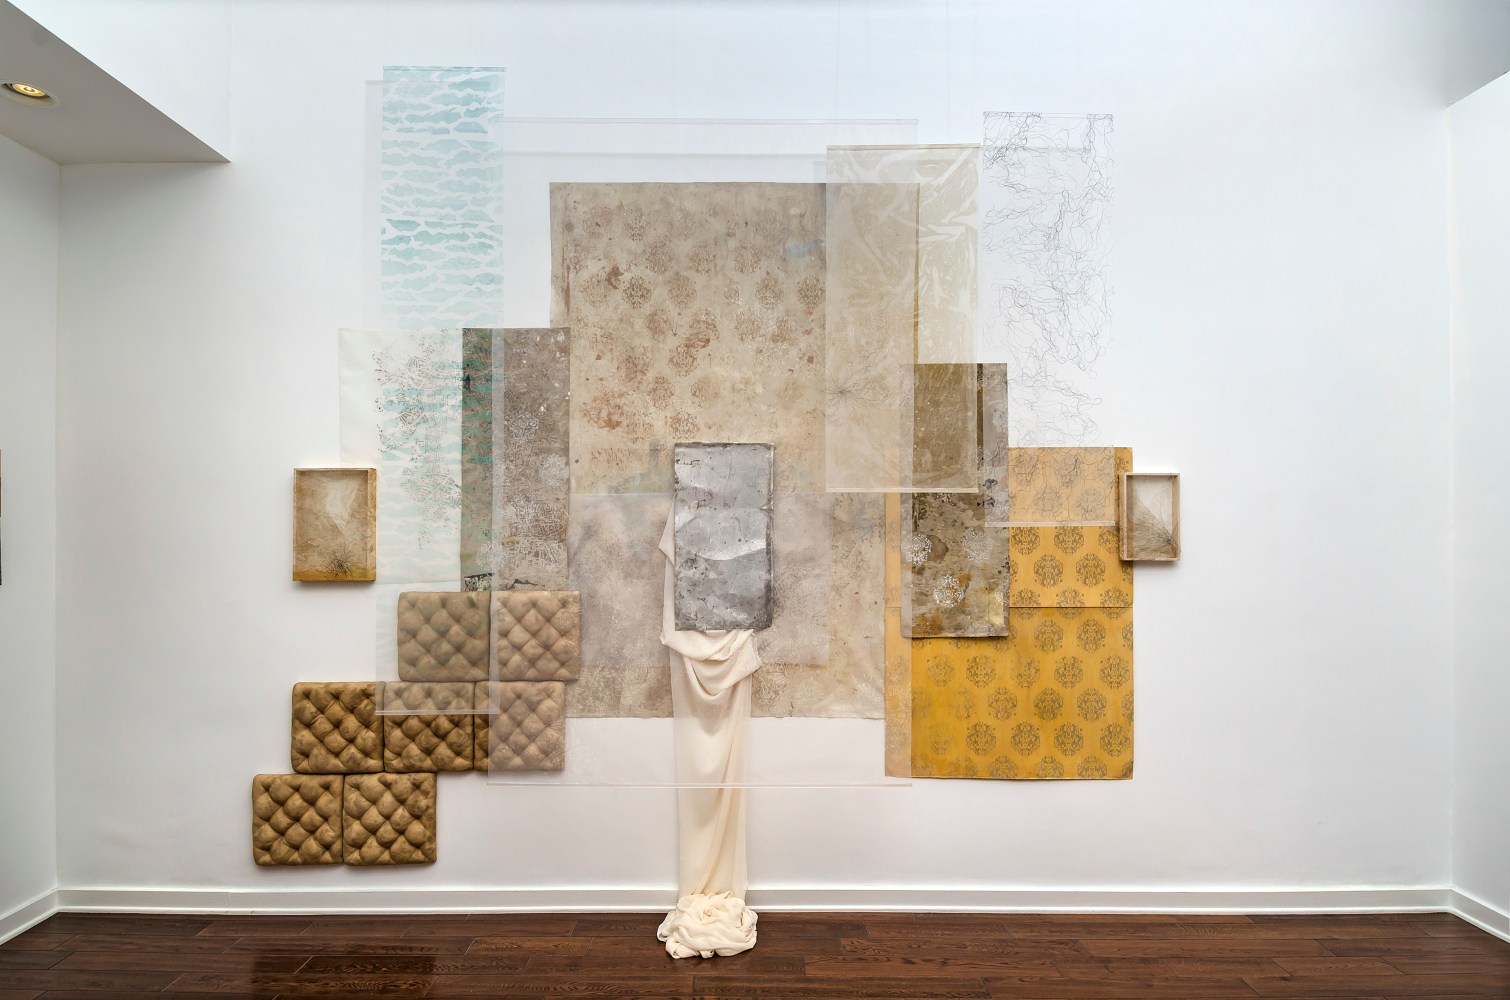 screen printed organza, found paper and drop cloth, stitched horse hair, ink-jet printed dropcloth, aluminum printing plate, silk chiffon, alpaca fur, horse hair, stained silk organza, beads, foam, wood 129 1/2 x 149 x 19 1/2 inches; 328.9 x 378.5 x 49.5 centimeters LSFA# 14170